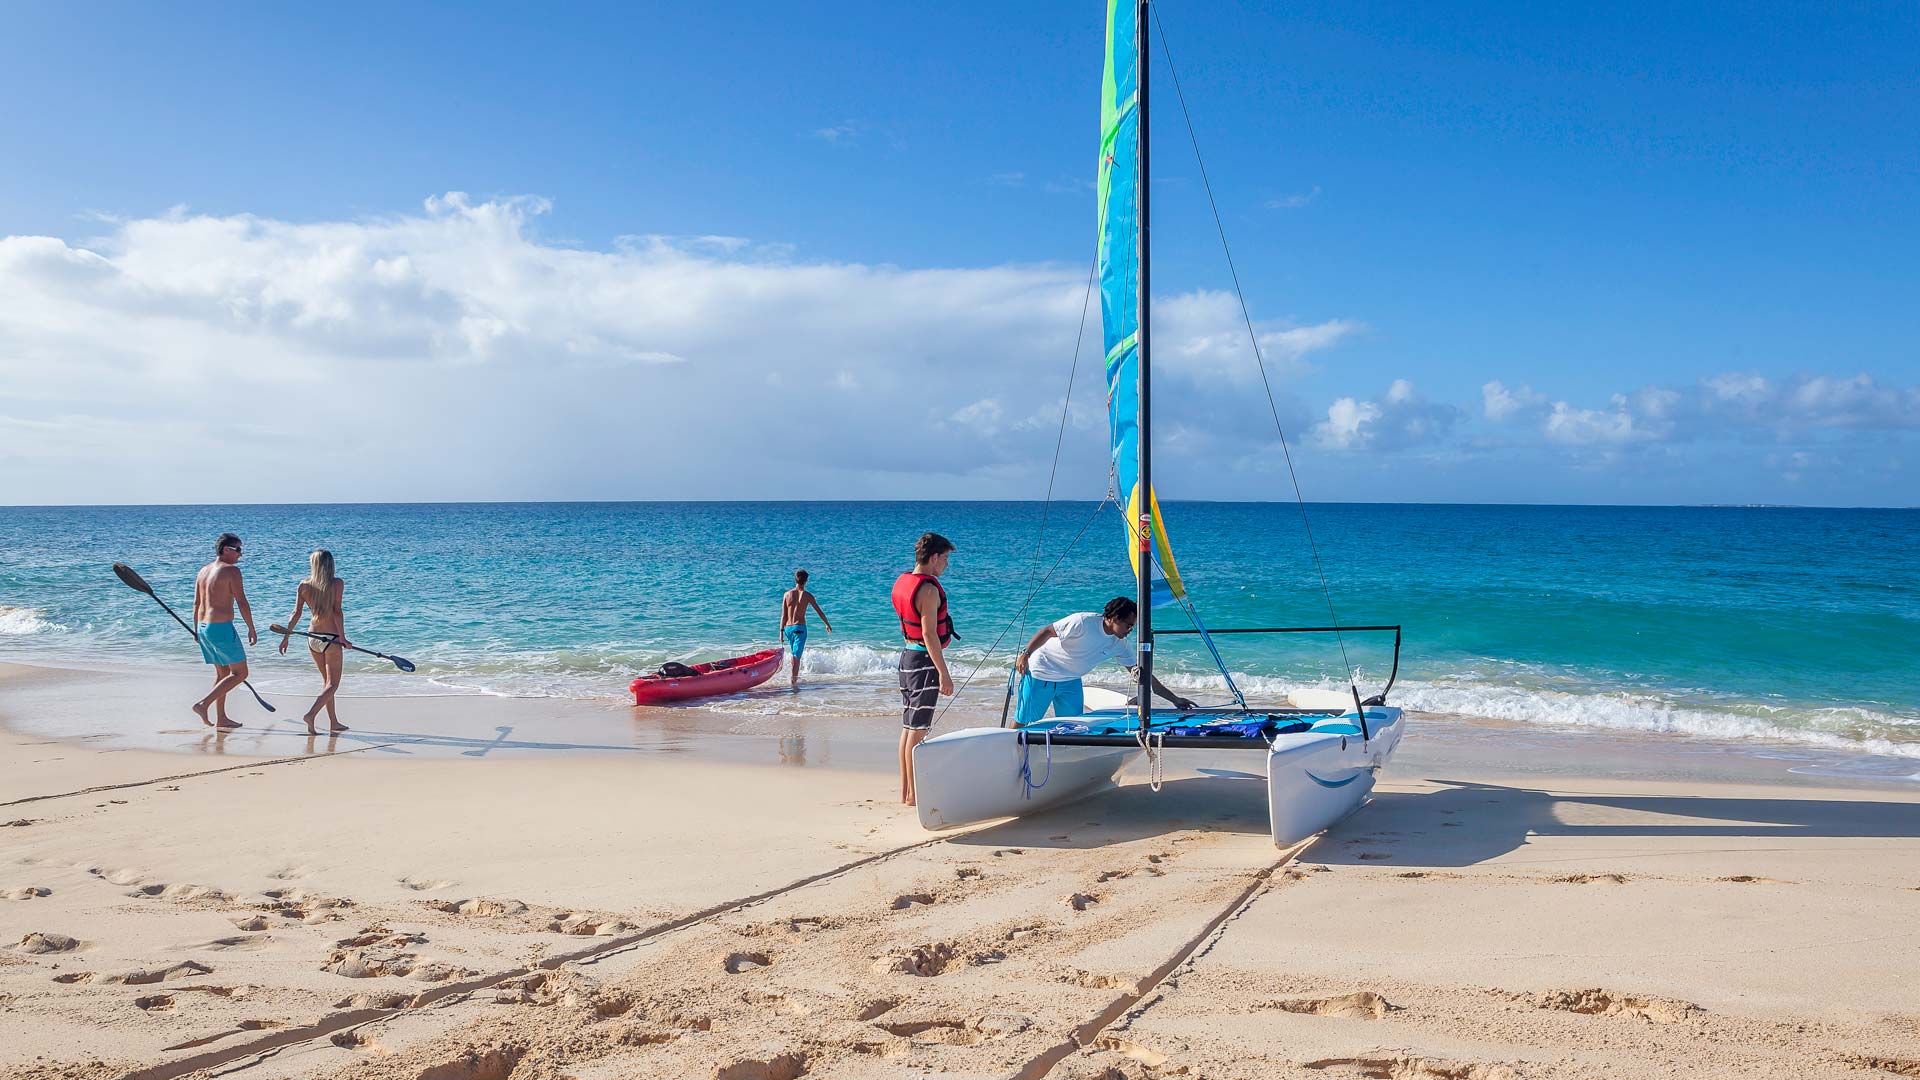 Cerulean Villa, Anguilla includes full water sports and gear for guests